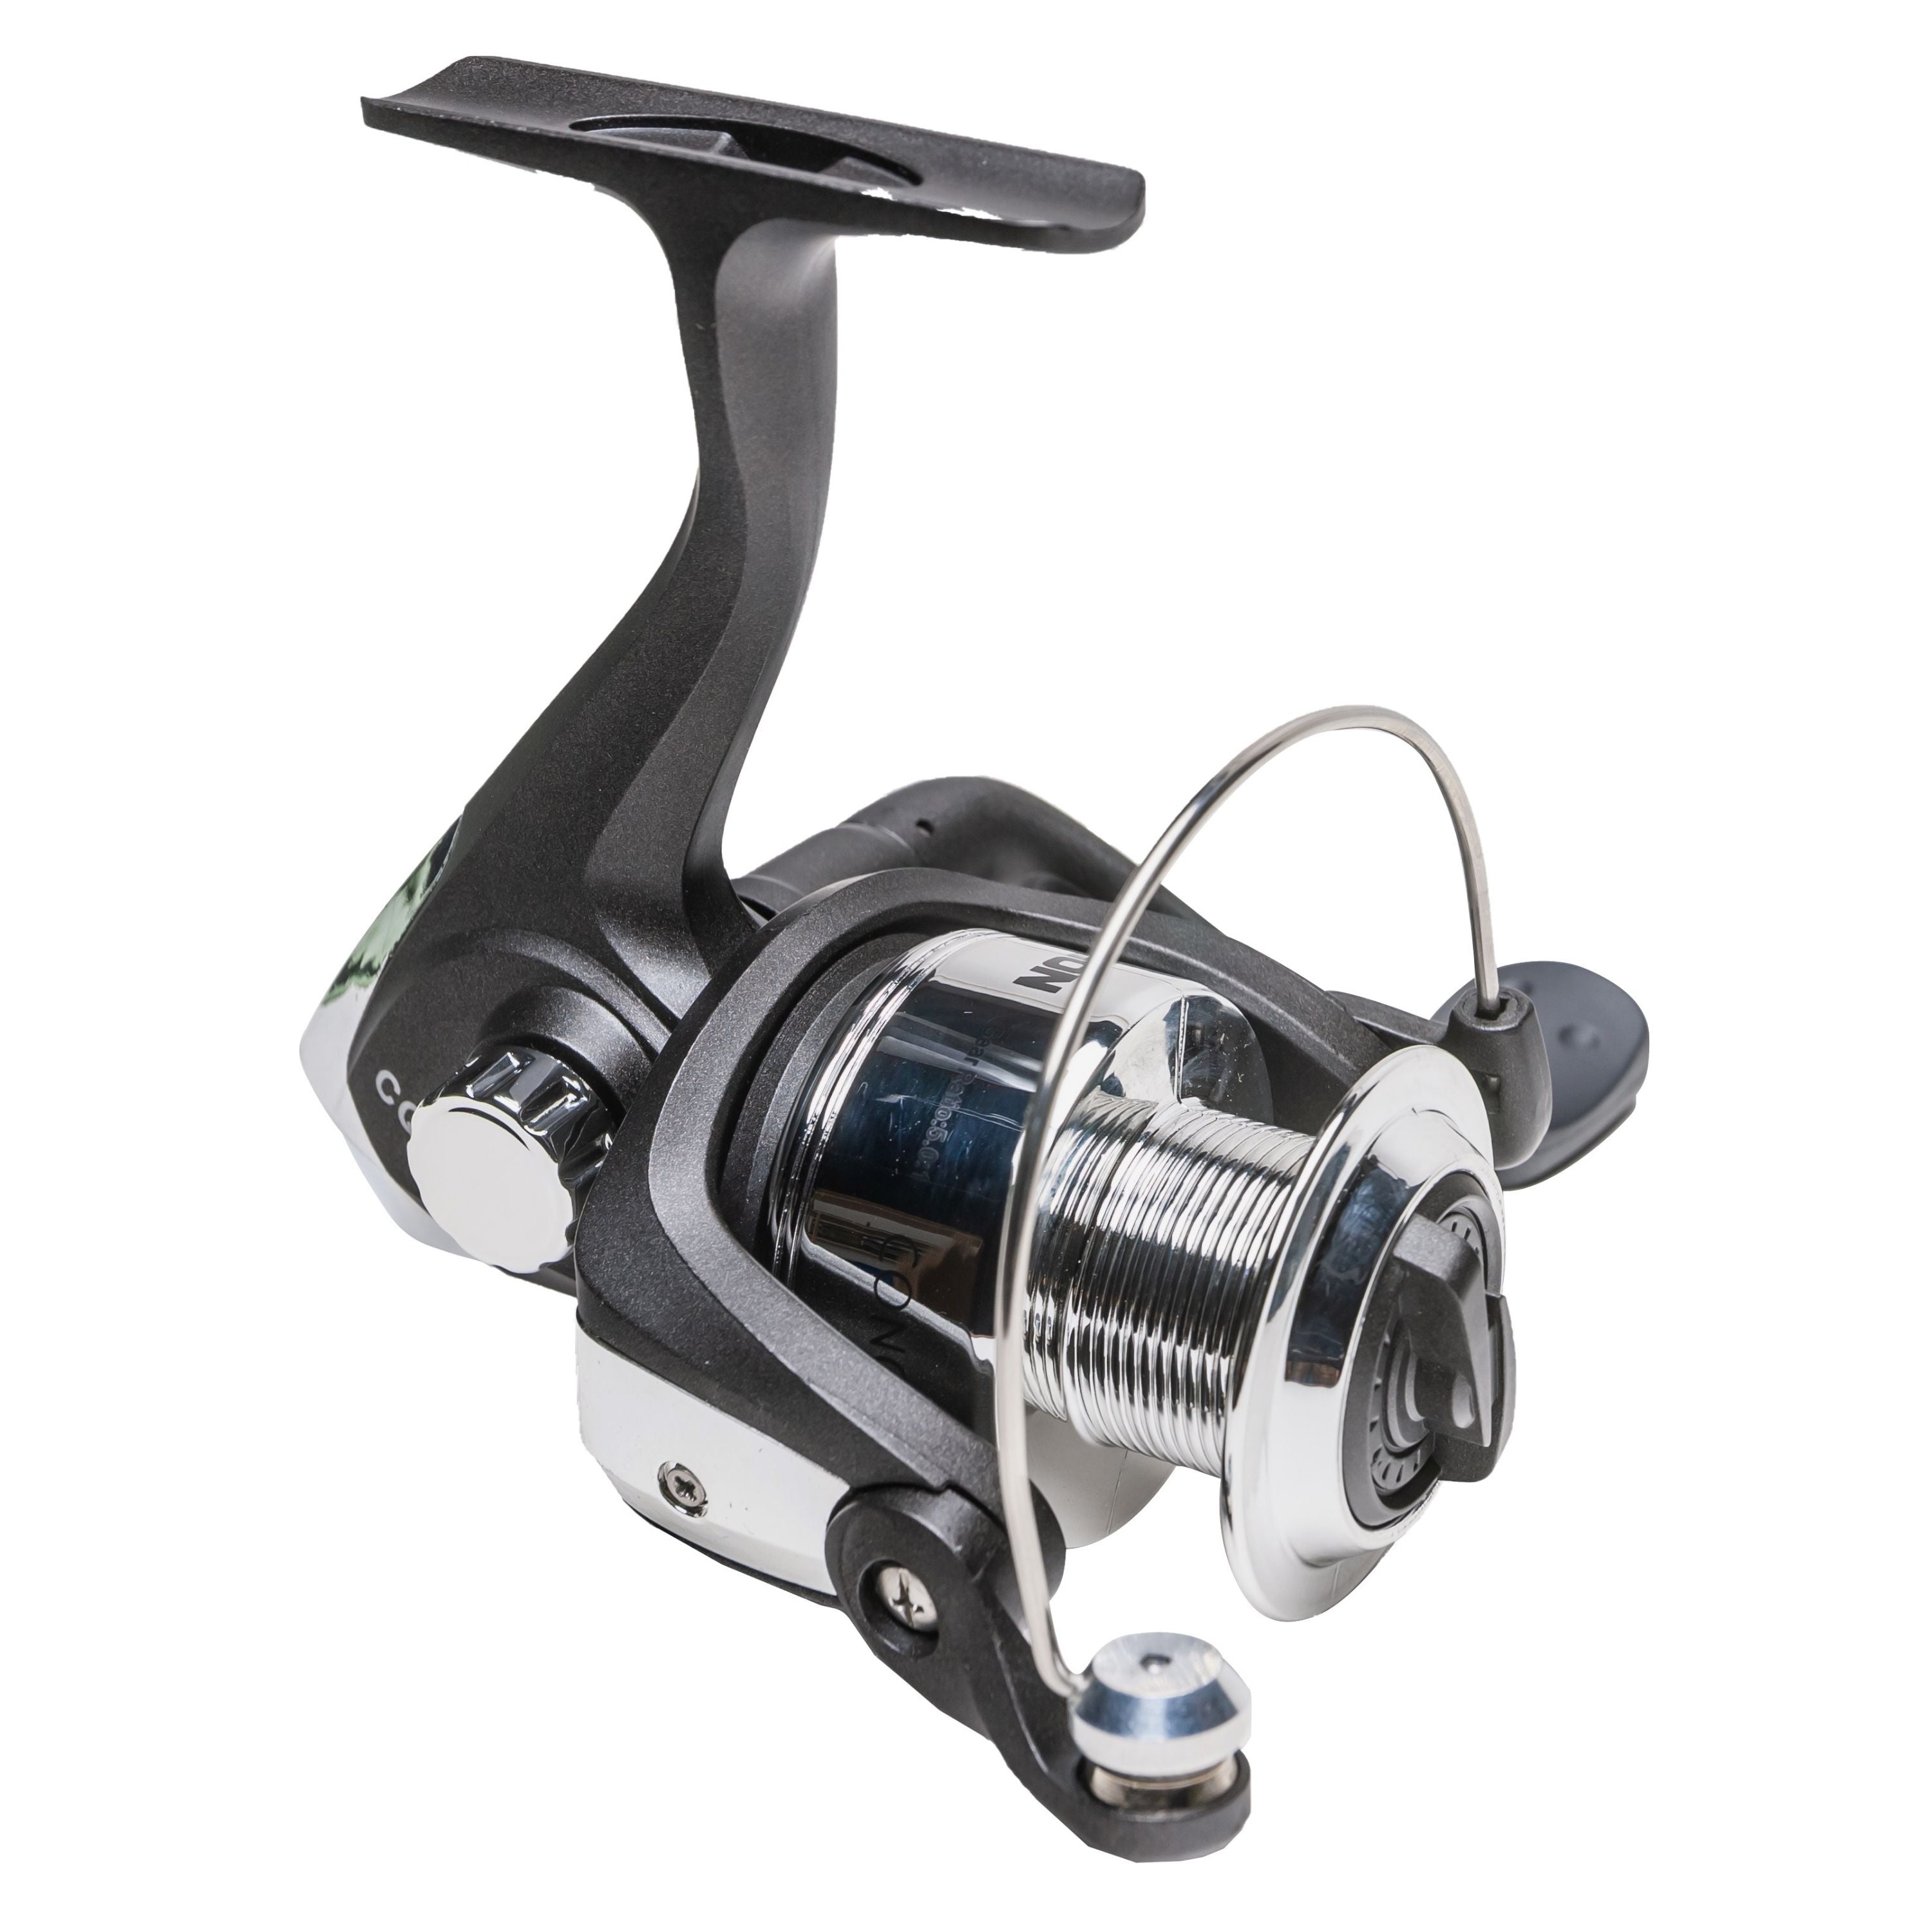 Moulinet lancer léger "Conquer"||"Conquer" Spinning reel